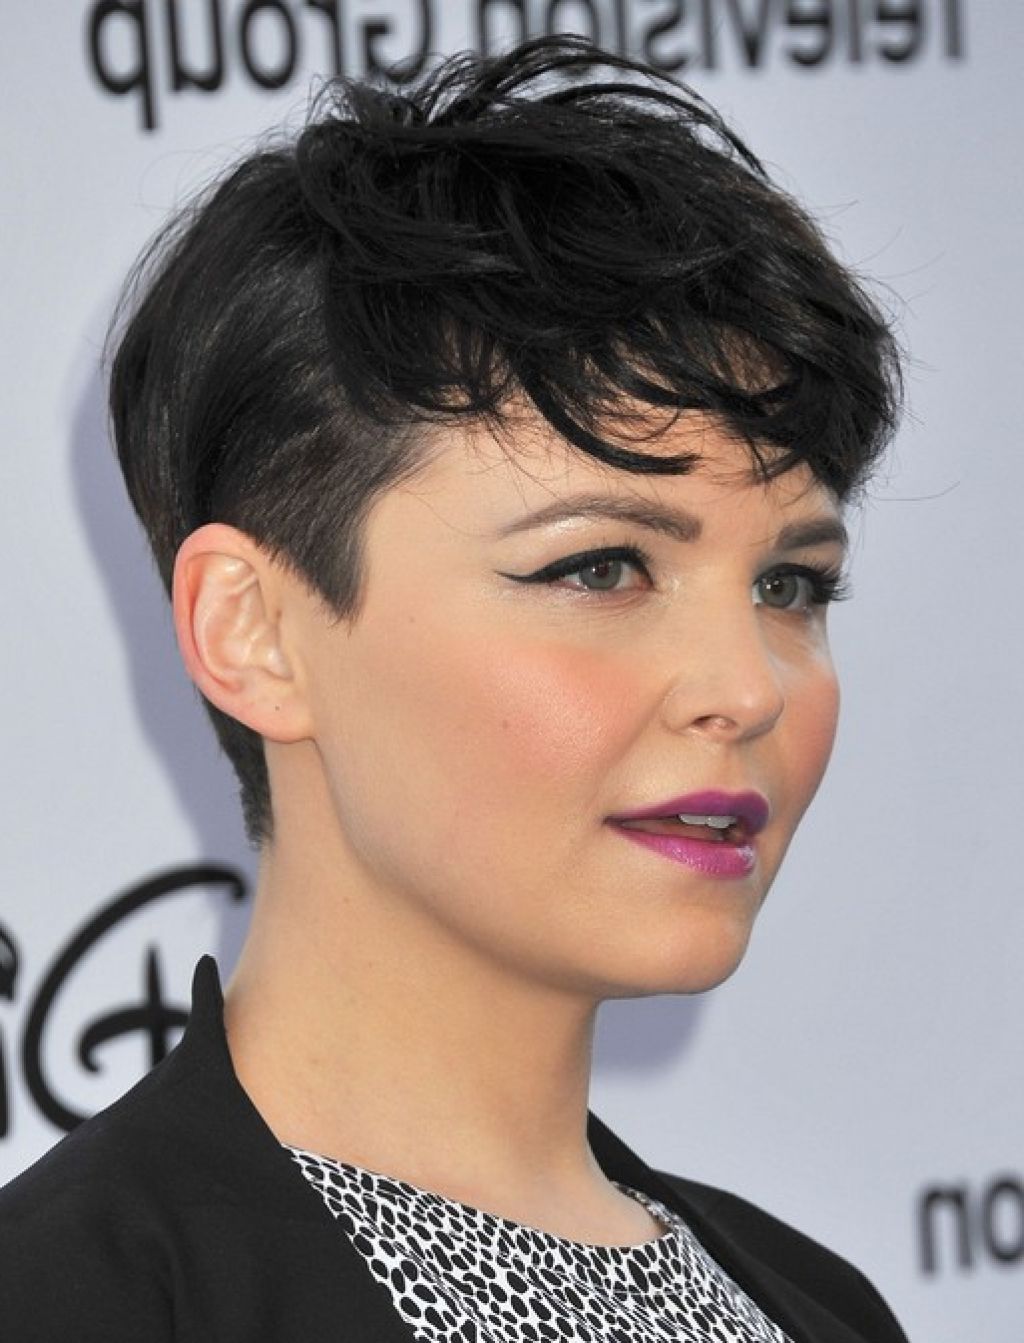 14 most beautiful short curly hairstyles and haircuts for women